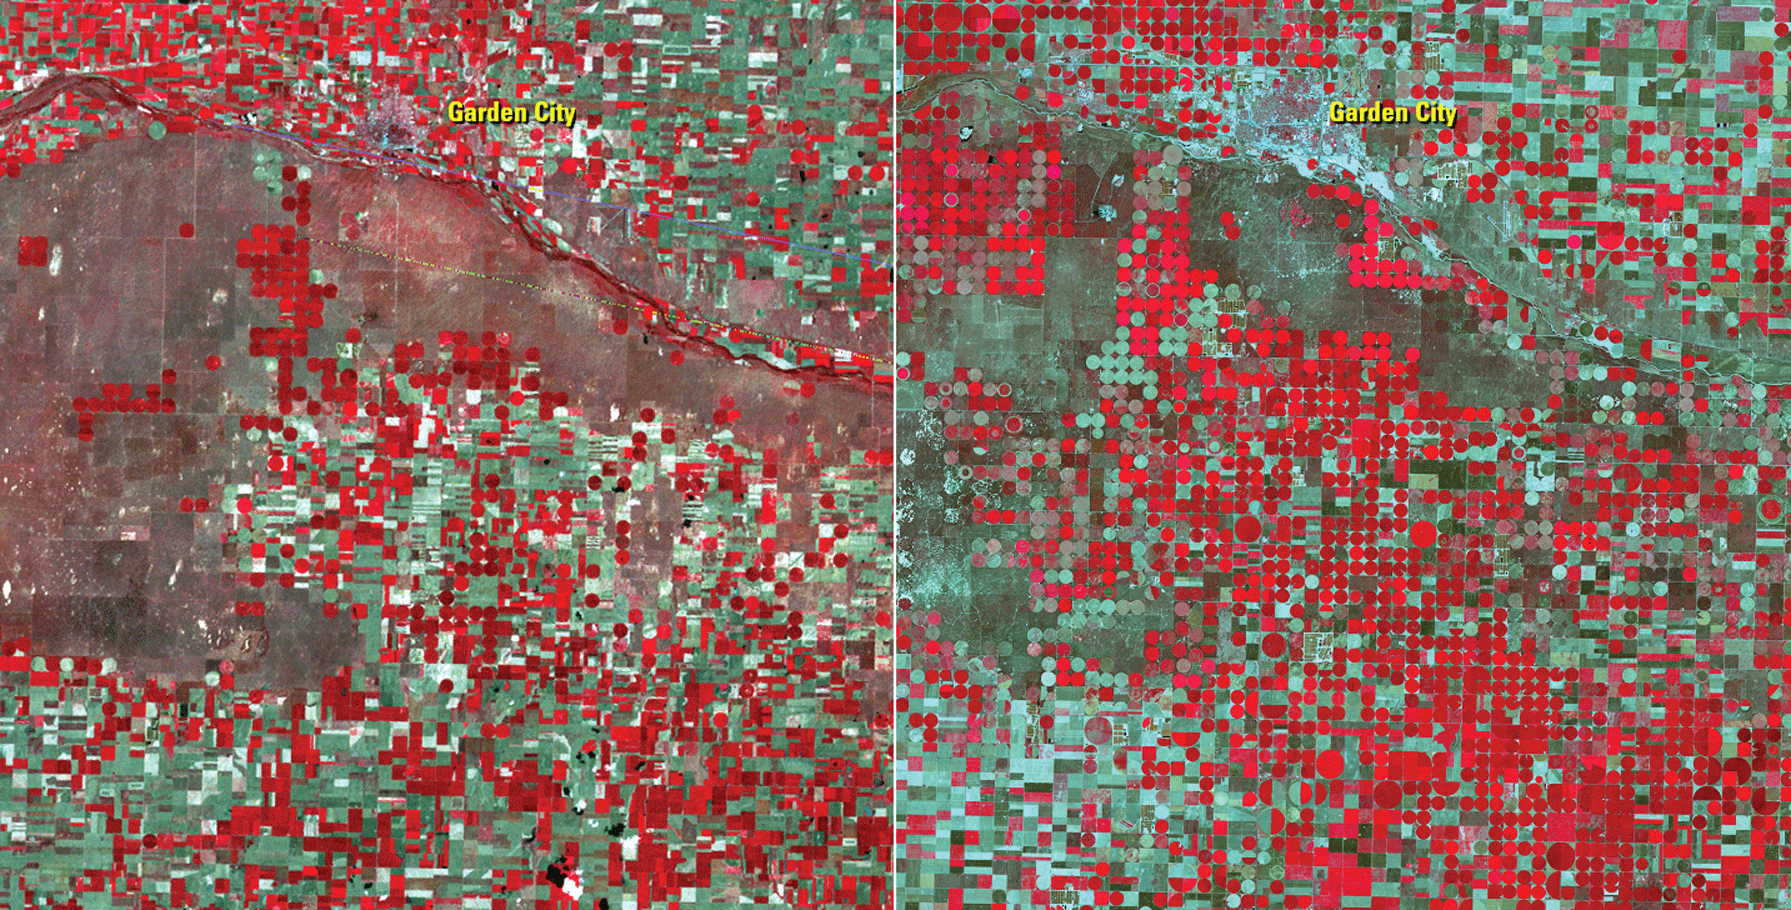 Center-pivot irrigation increased greatly in southwestern Kansas from 1972 to 2021.